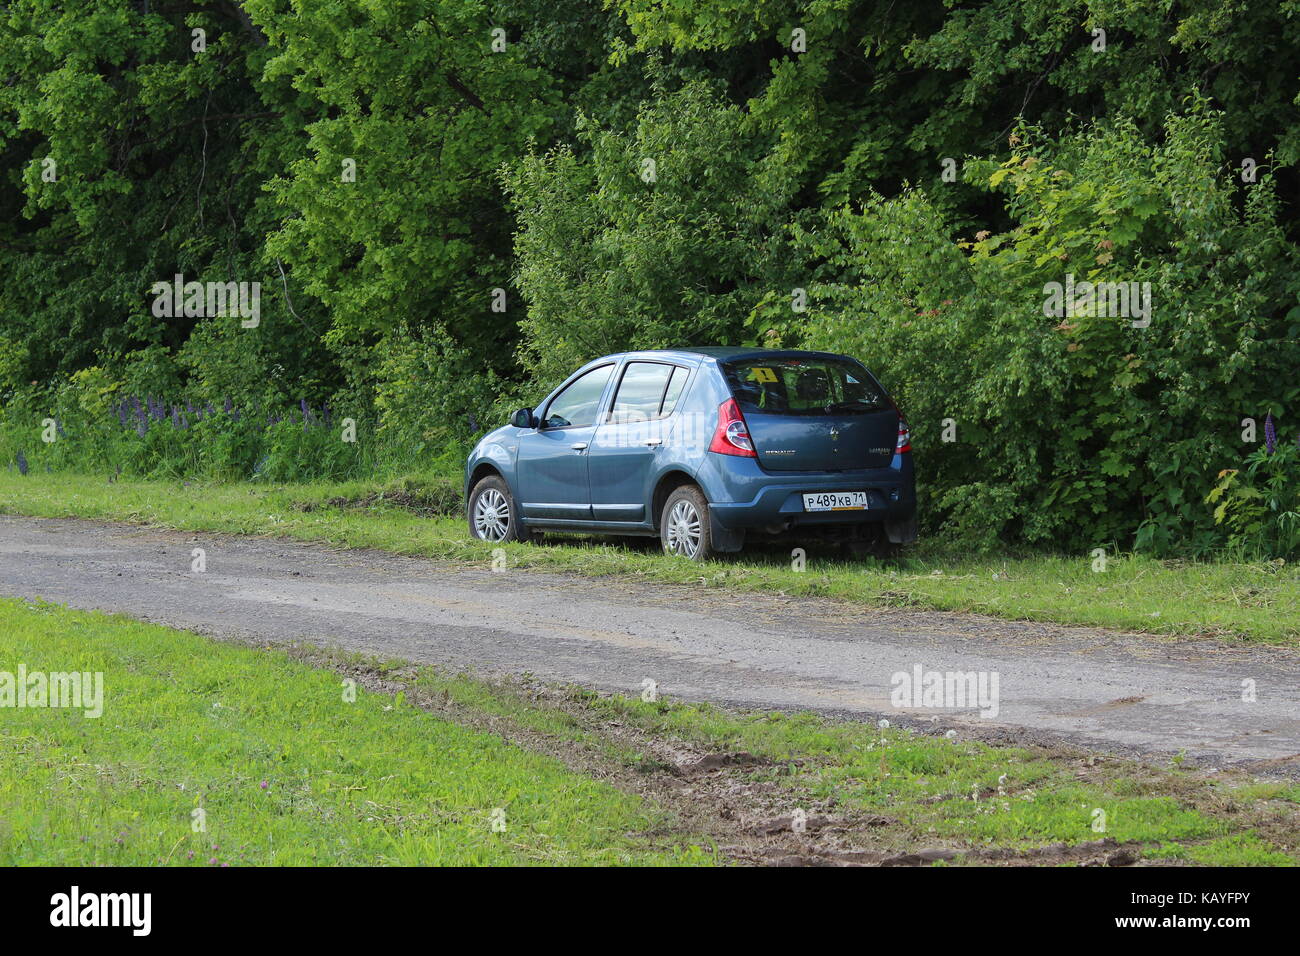 The car 'Renault Sandero' is parked at the roadside against the backdrop of a green forest. Stock Photo